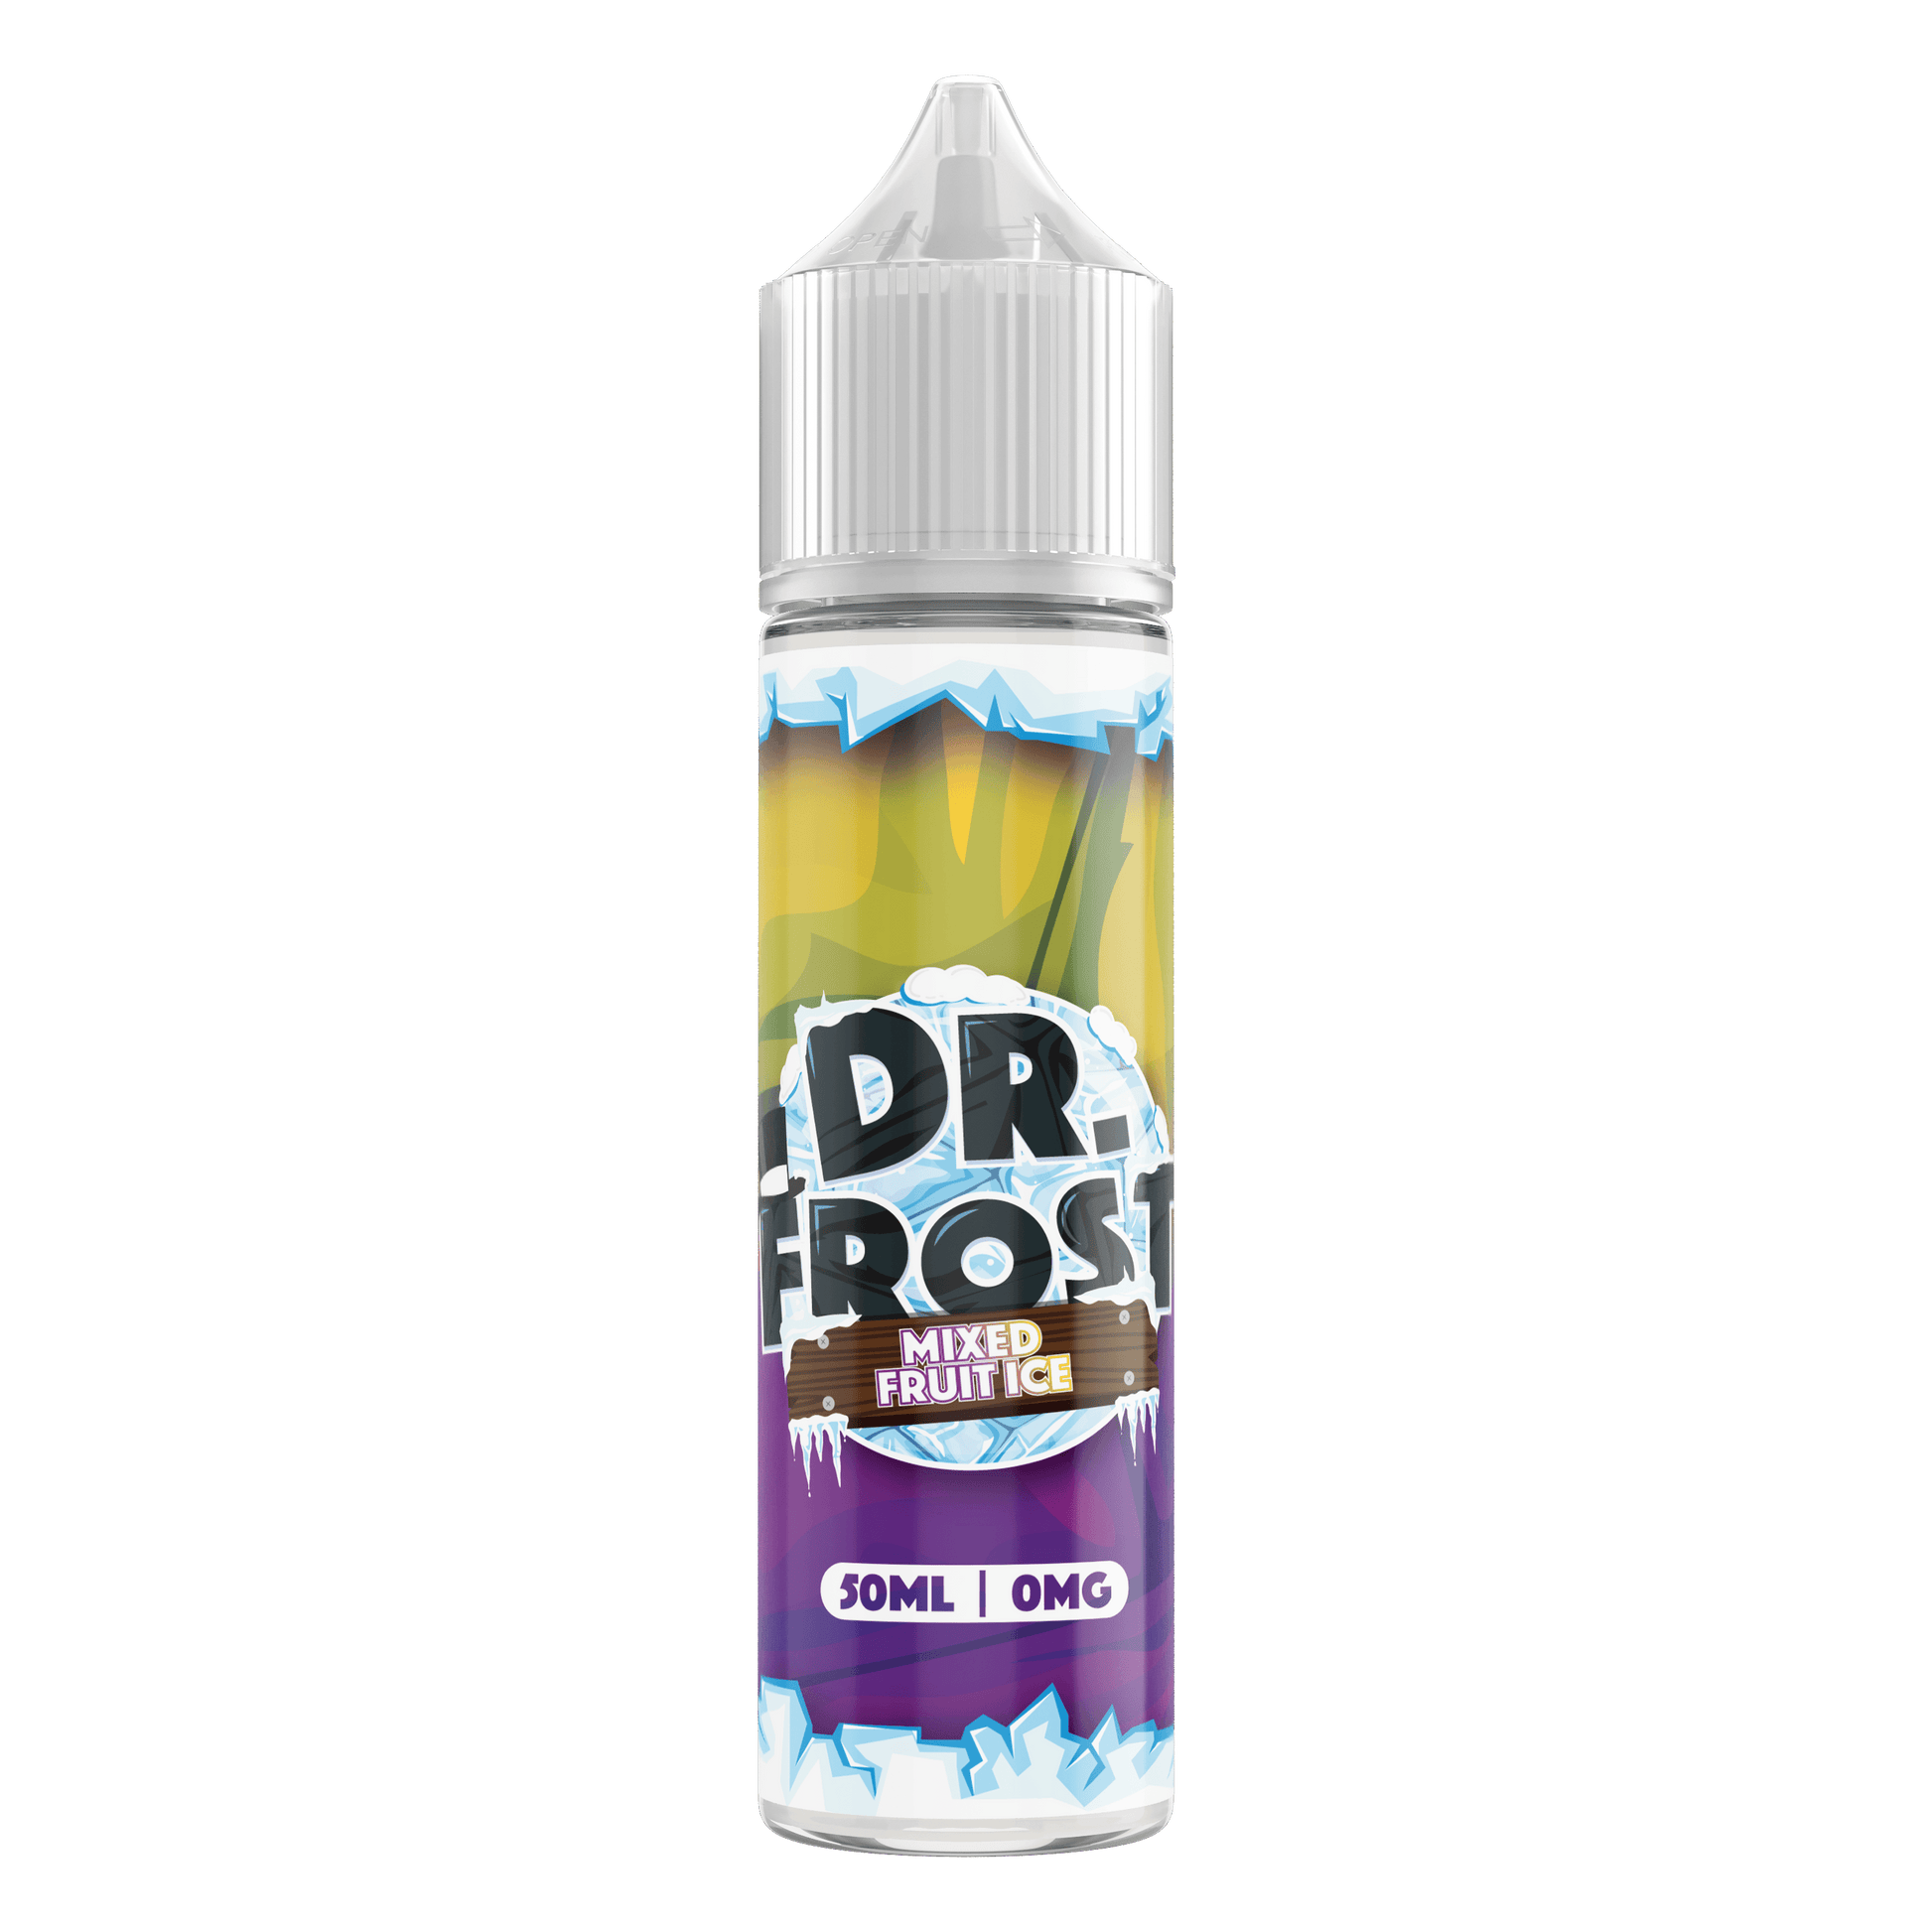 Dr.Frost - Mixed Fruit Ice 50ml - Vaper Aid